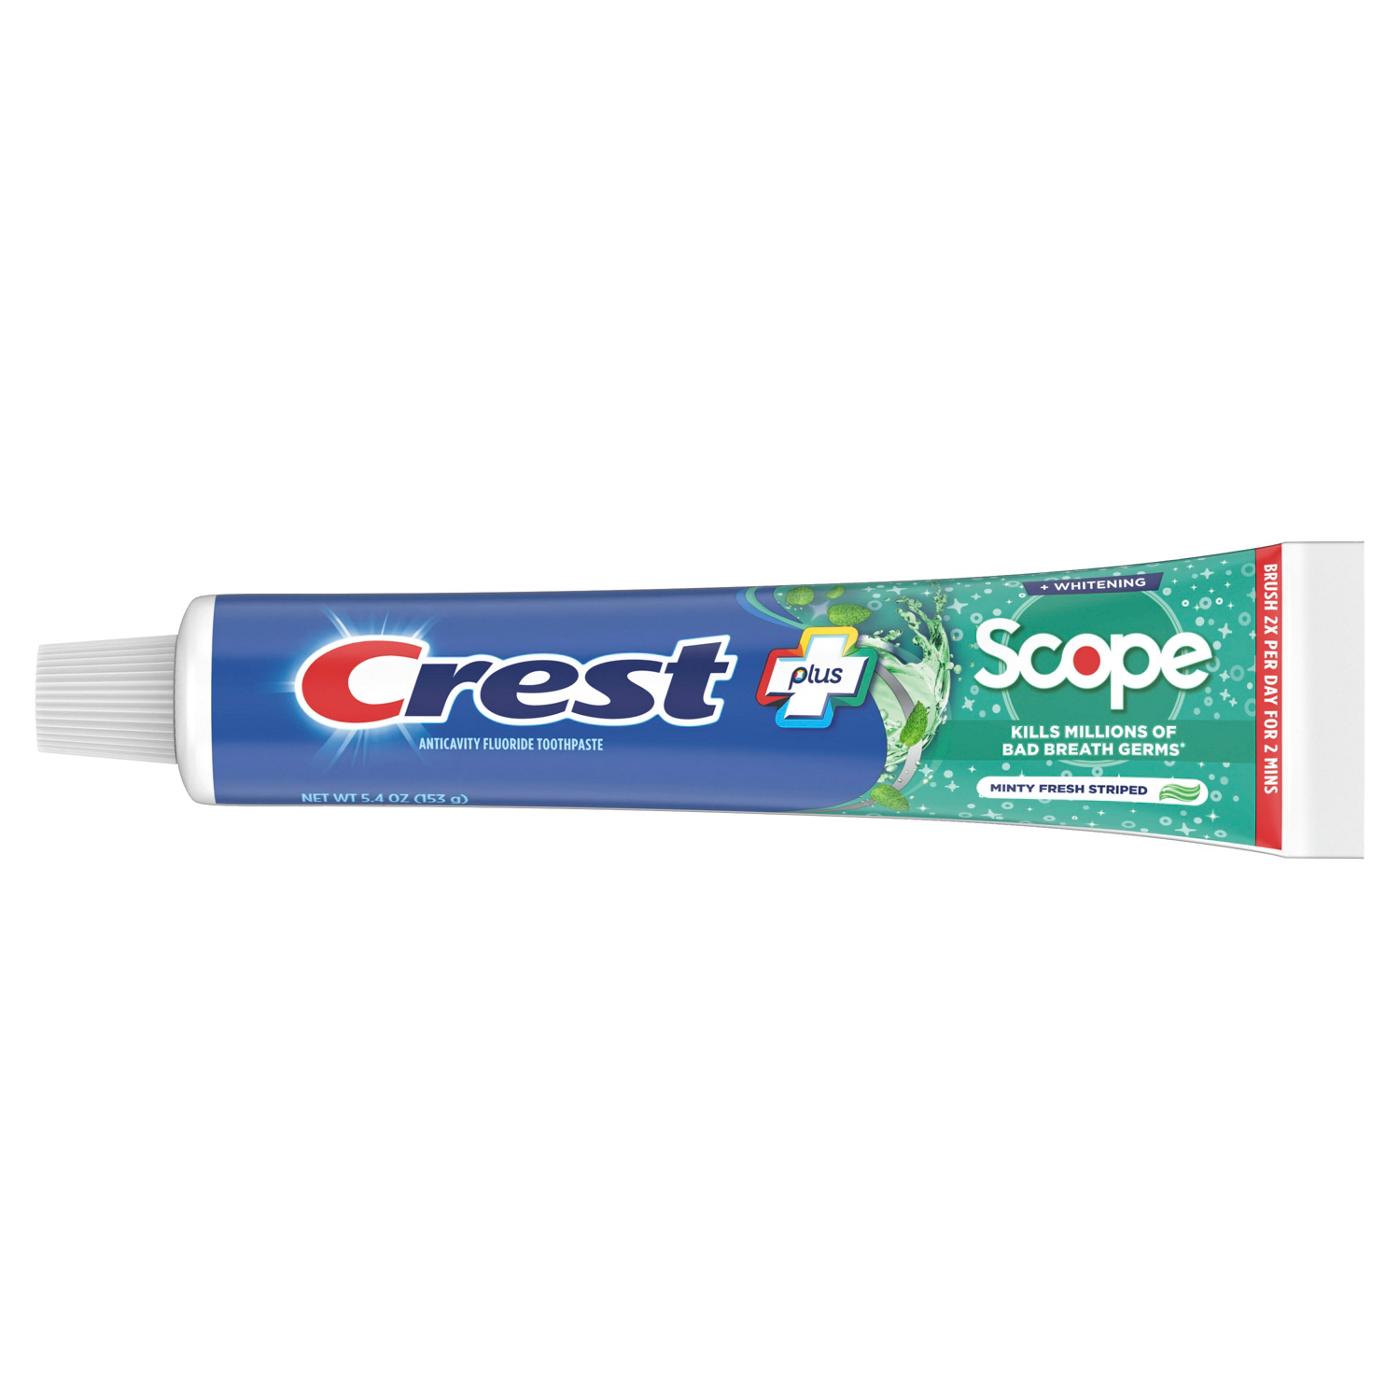 Crest Complete + Scope Whitening Toothpaste - Minty Fresh Striped; image 8 of 10